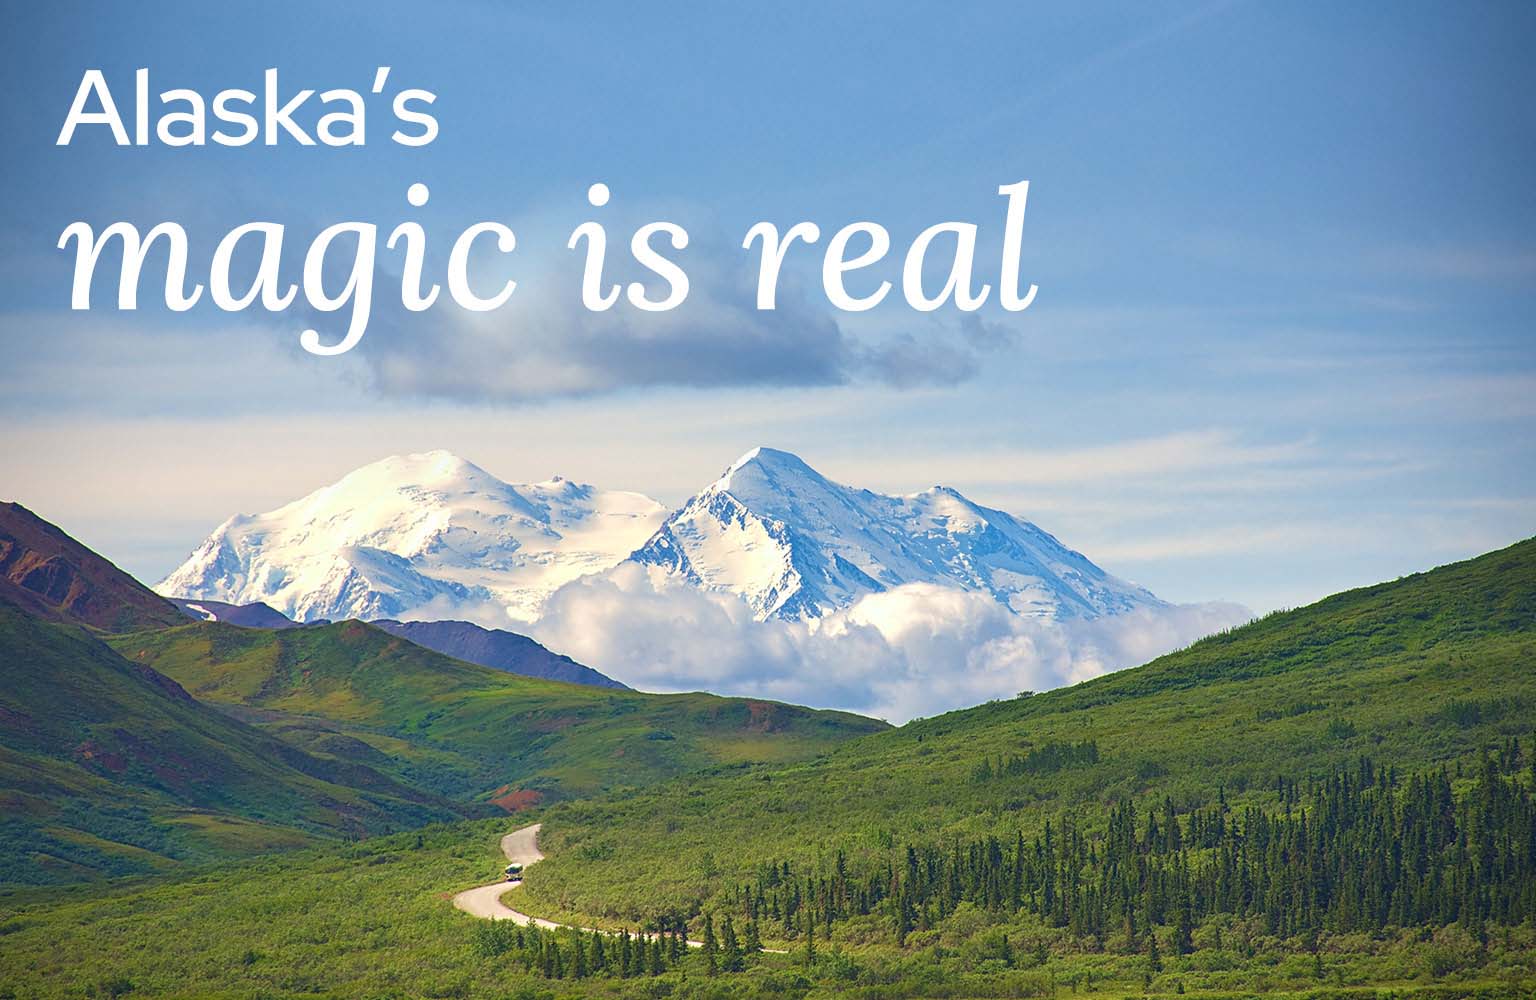 Alaska's magic is real. Watch The magic is real in Alaska with Princess video.